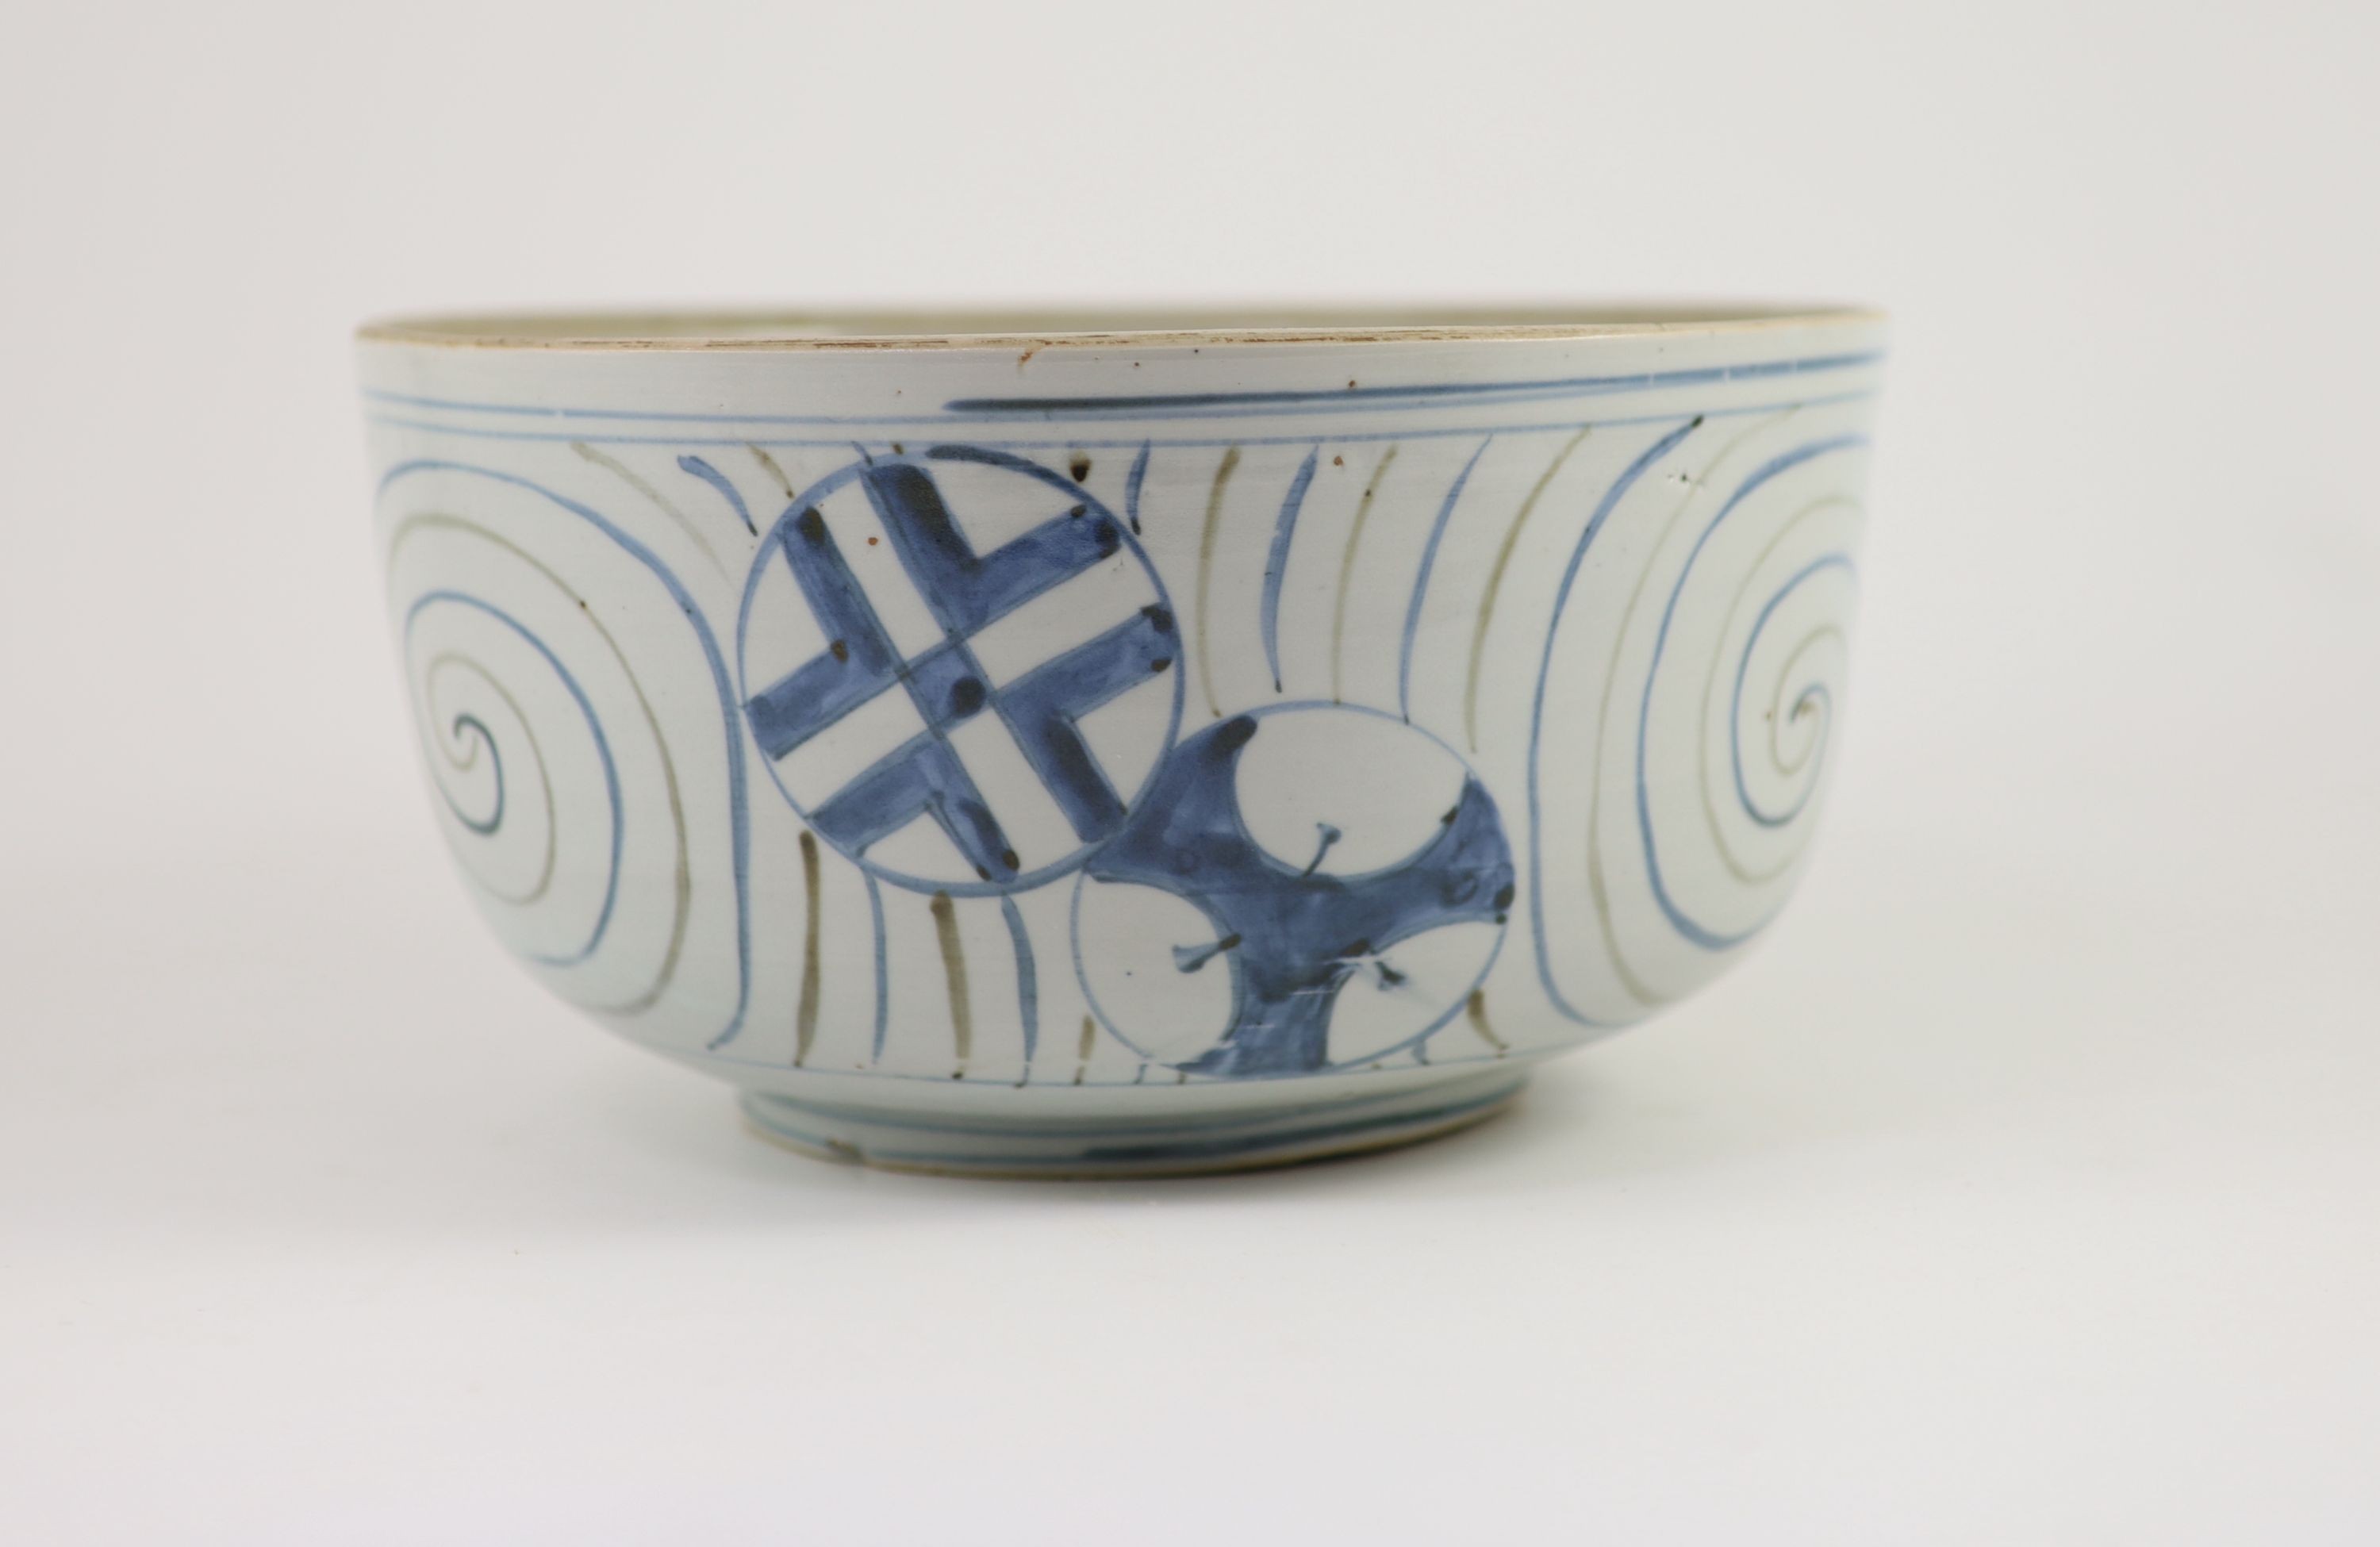 An unusual underglaze blue and iron brown bowl, probably Korean, Joseon dynasty, 18th/19th century, 23cm diameter, lacking its cover, cracked